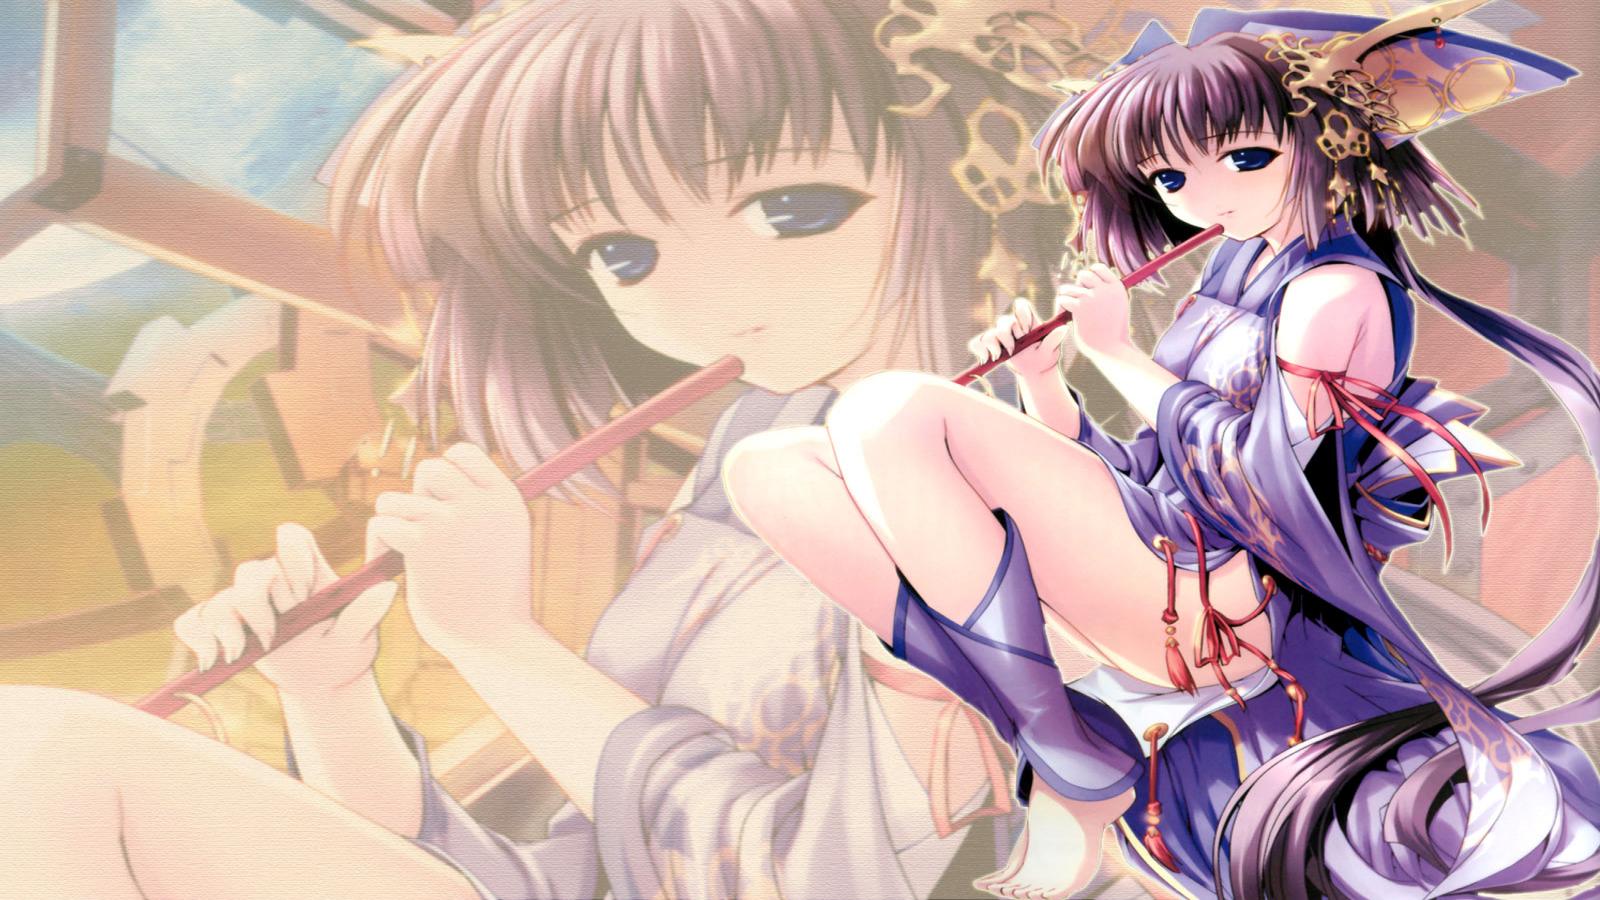 Flute Anime HD Wallpapers 1600x900 Anime Wallpapers 1600x900 Download